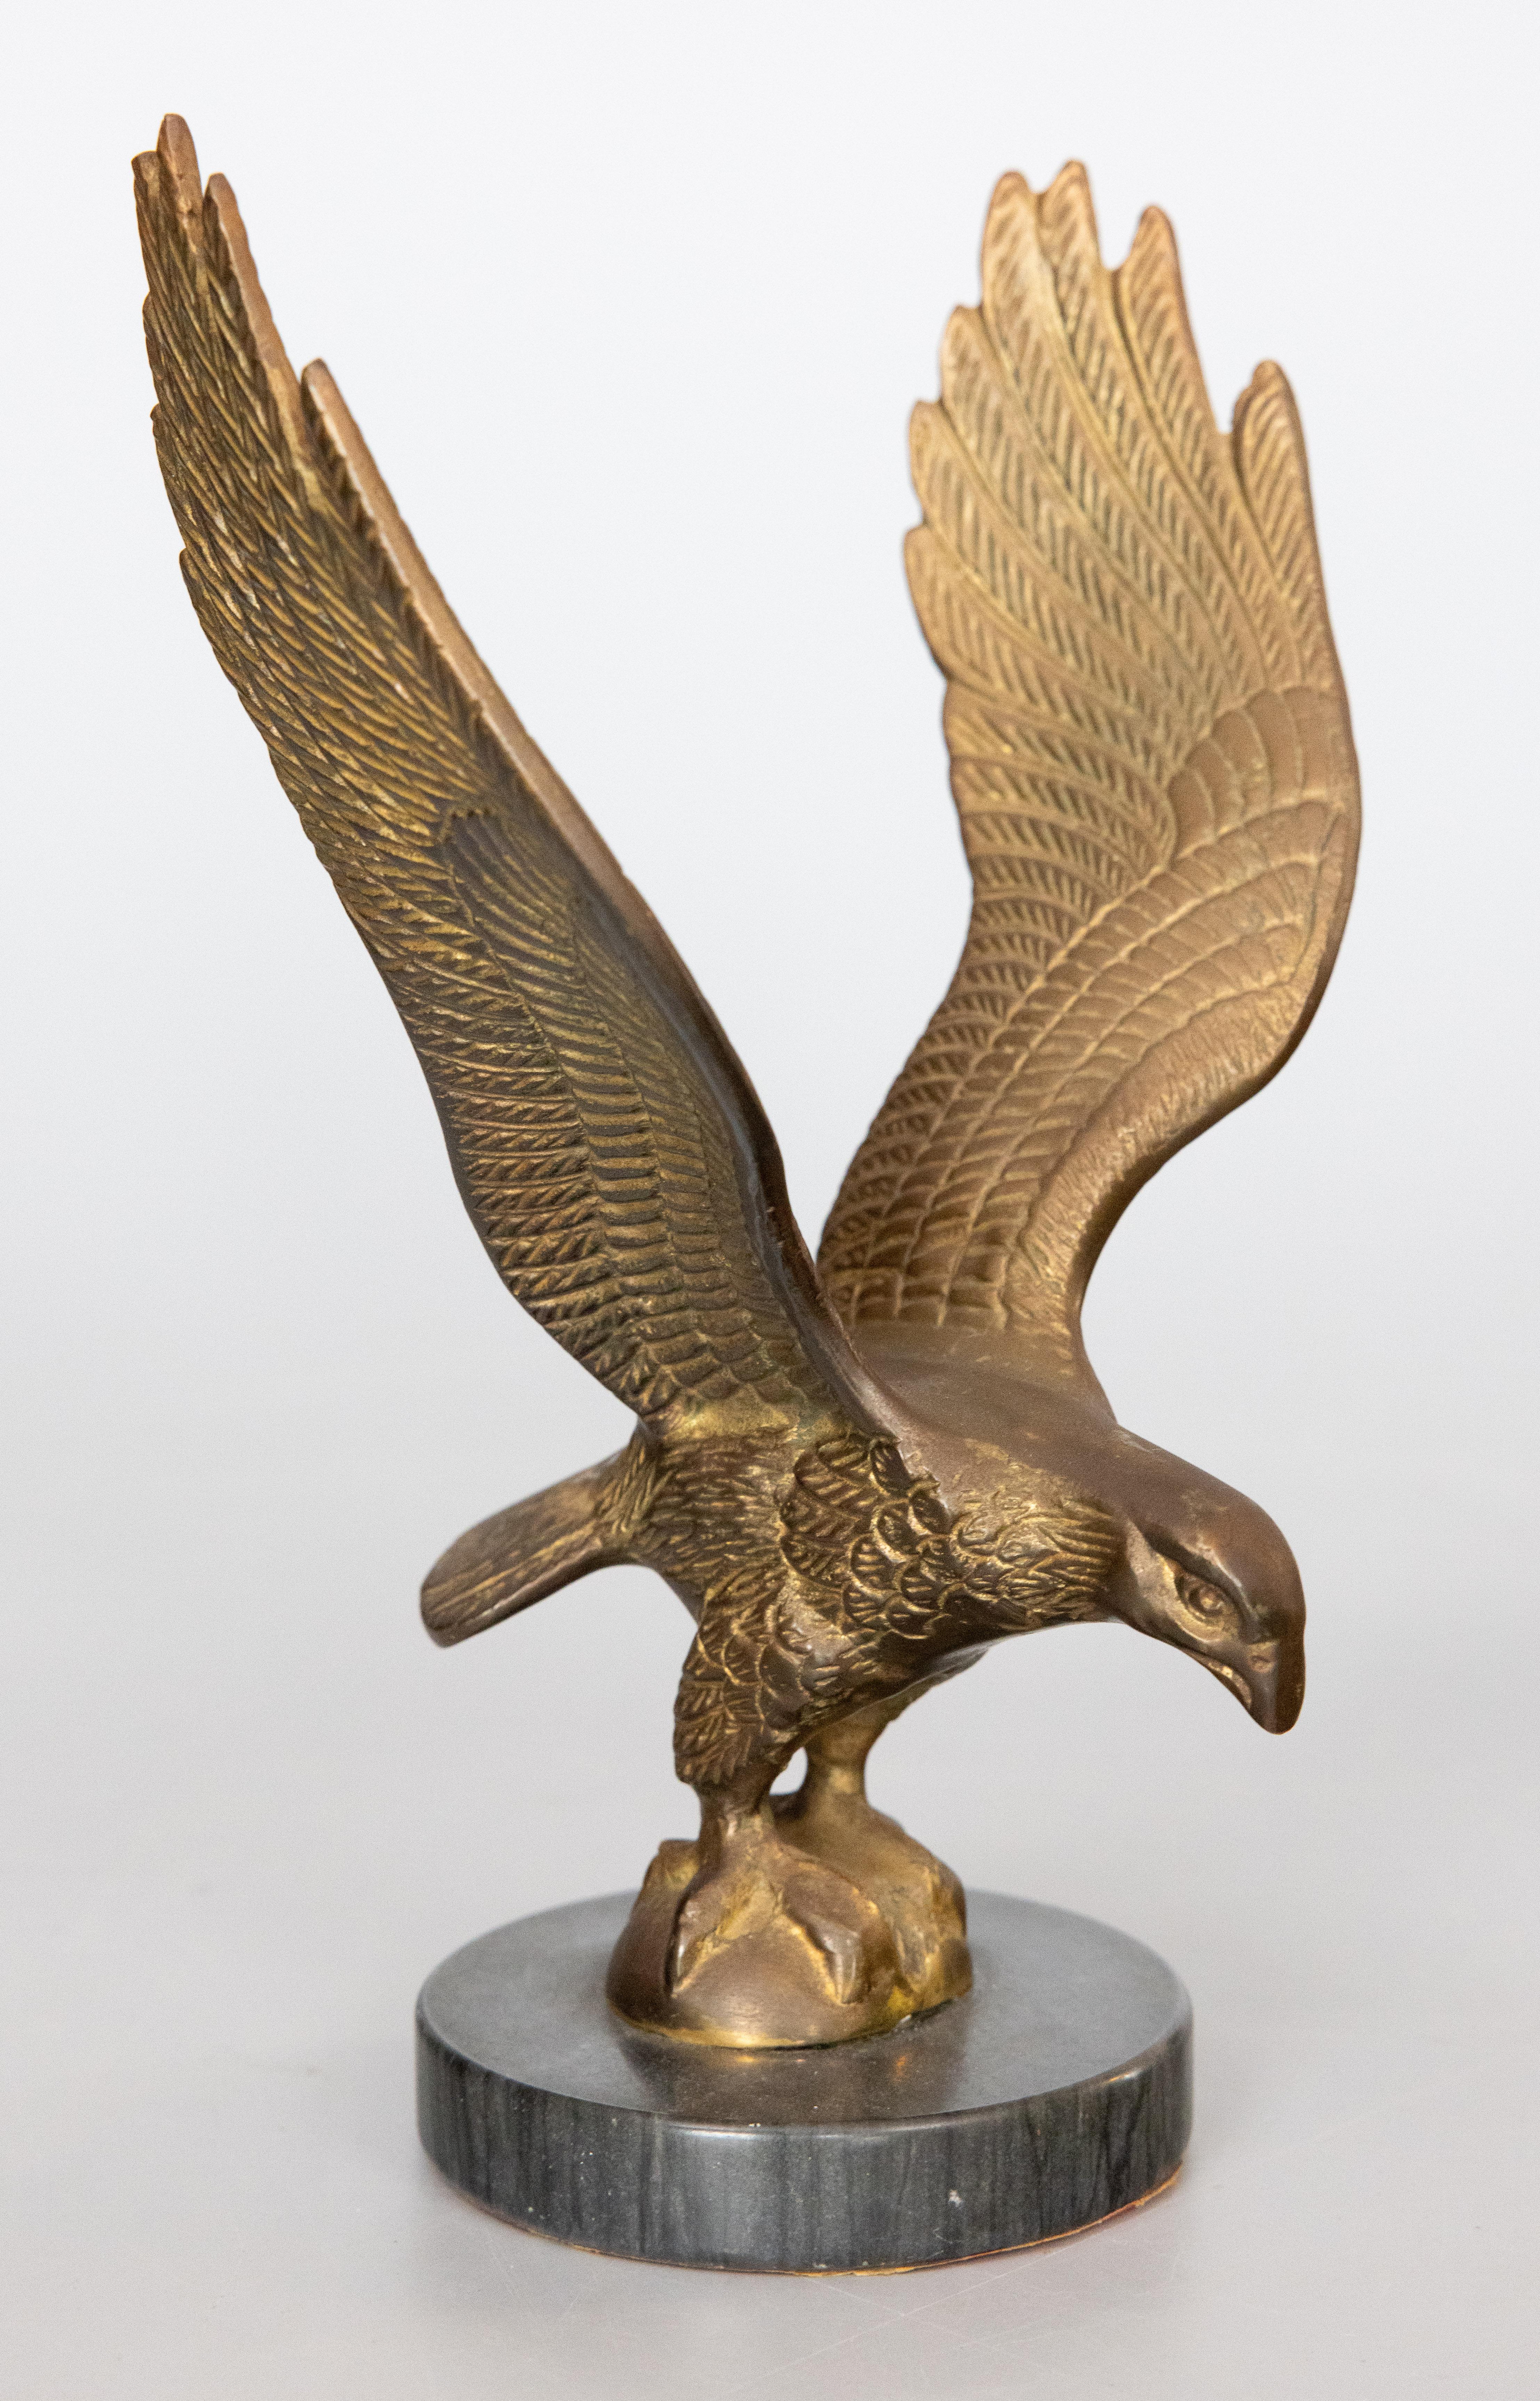 Beautiful finely-crafted brass vintage eagle sculpture or paper weight with a lovely patina. It is solid and heavy, weighing a substantial 3 1/2 lbs, with very fine details and a gorgeous marble base. It would be handsome on a bookcase or desk and